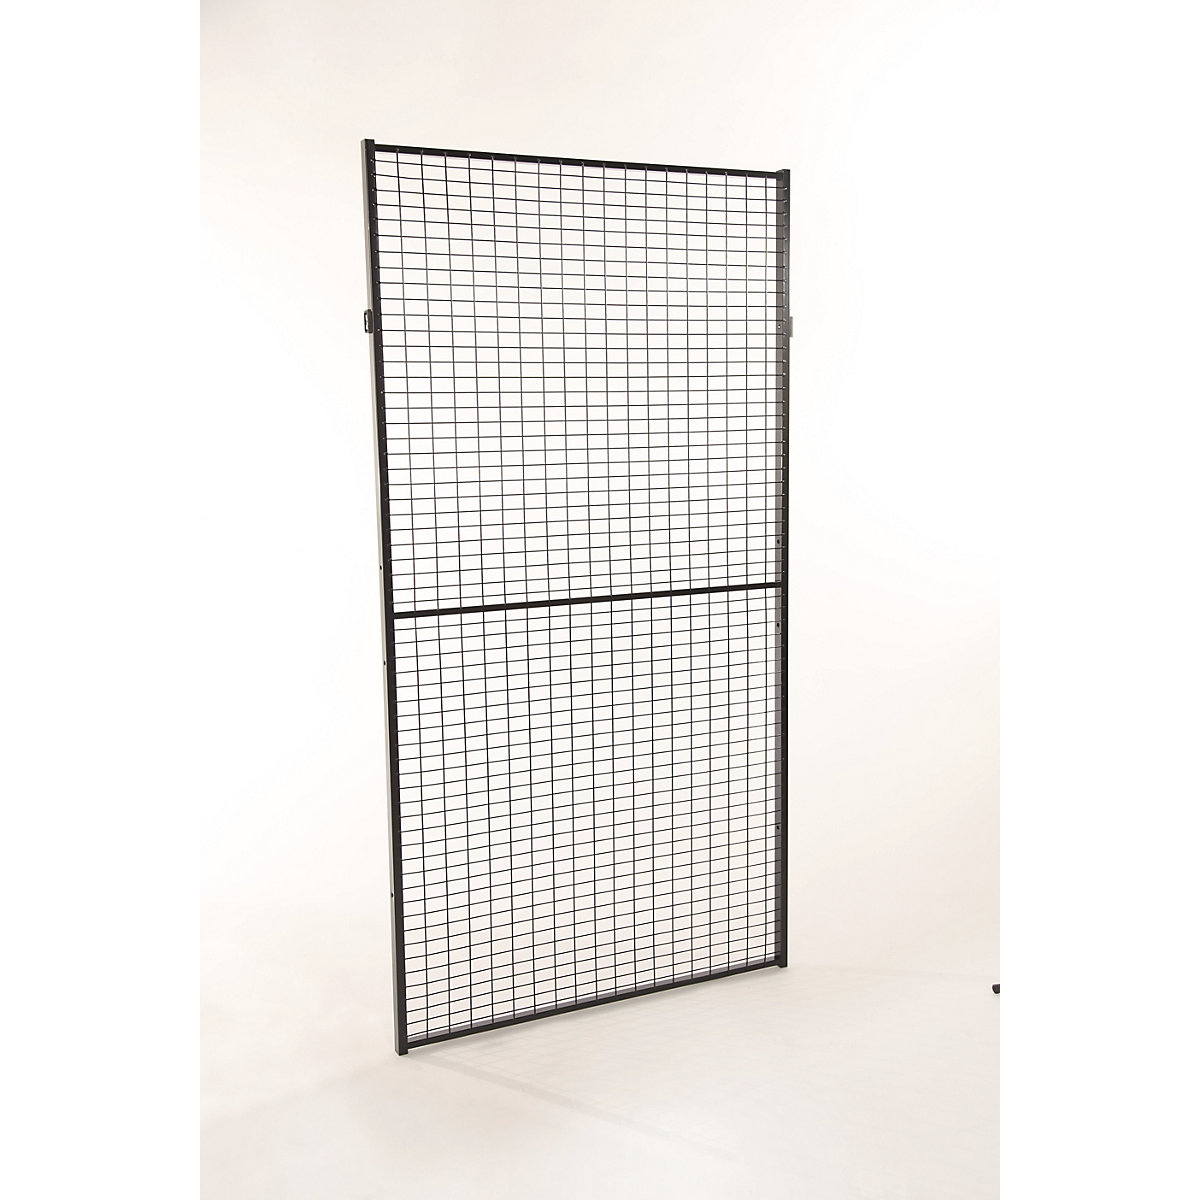 X-GUARD CLASSIC machine protective fencing, wall section – Axelent, height 2200 mm, width 700 mm-13